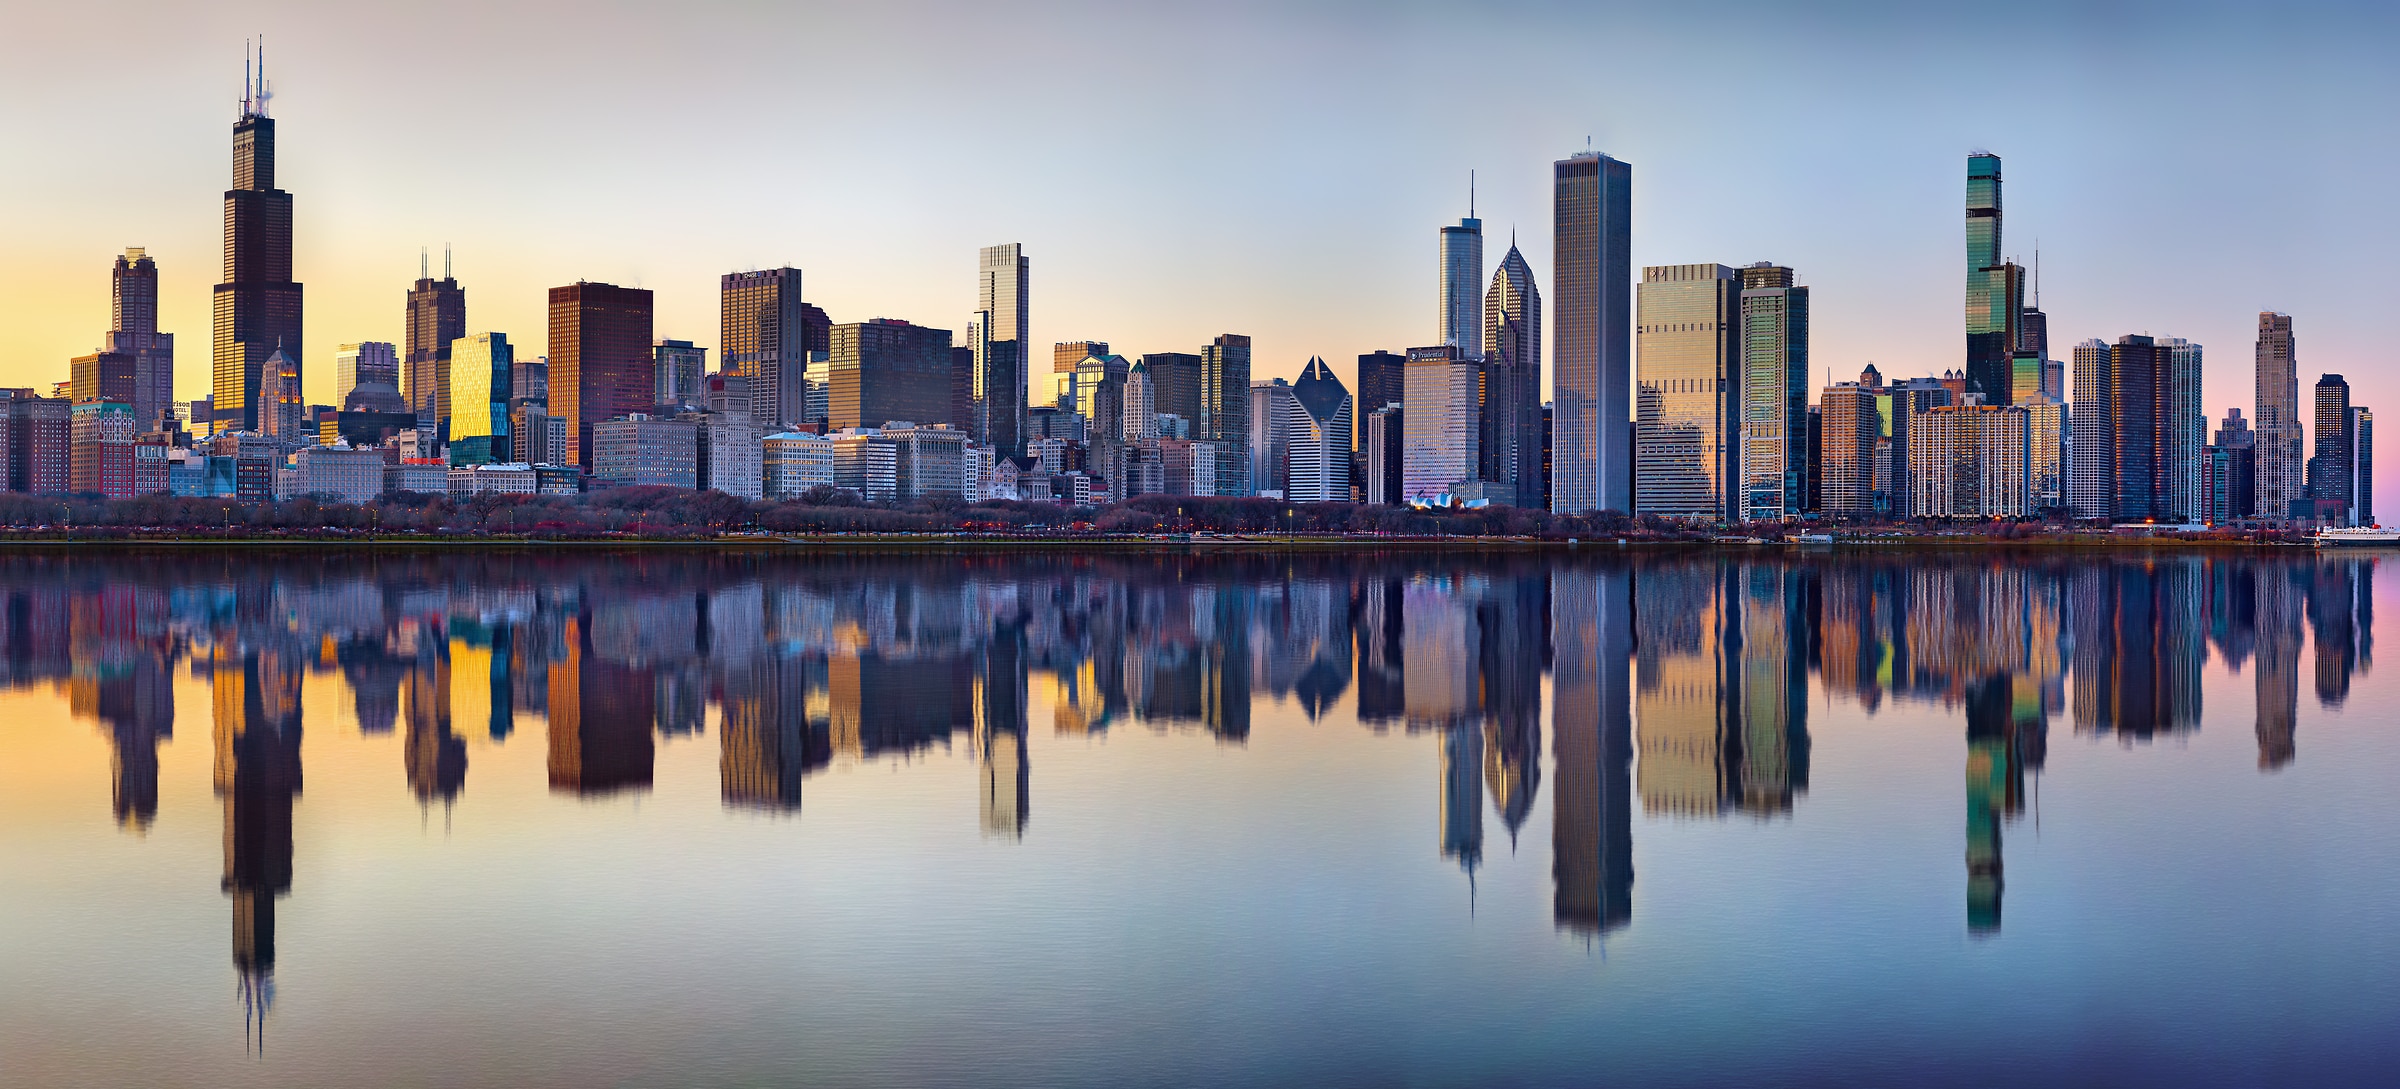 742 megapixels! A very high resolution, large-format VAST photo print of the Chicago skyline and Lake Michigan at sunset; skyline photograph created by Phil Crawshay in Chicago, Illinois.